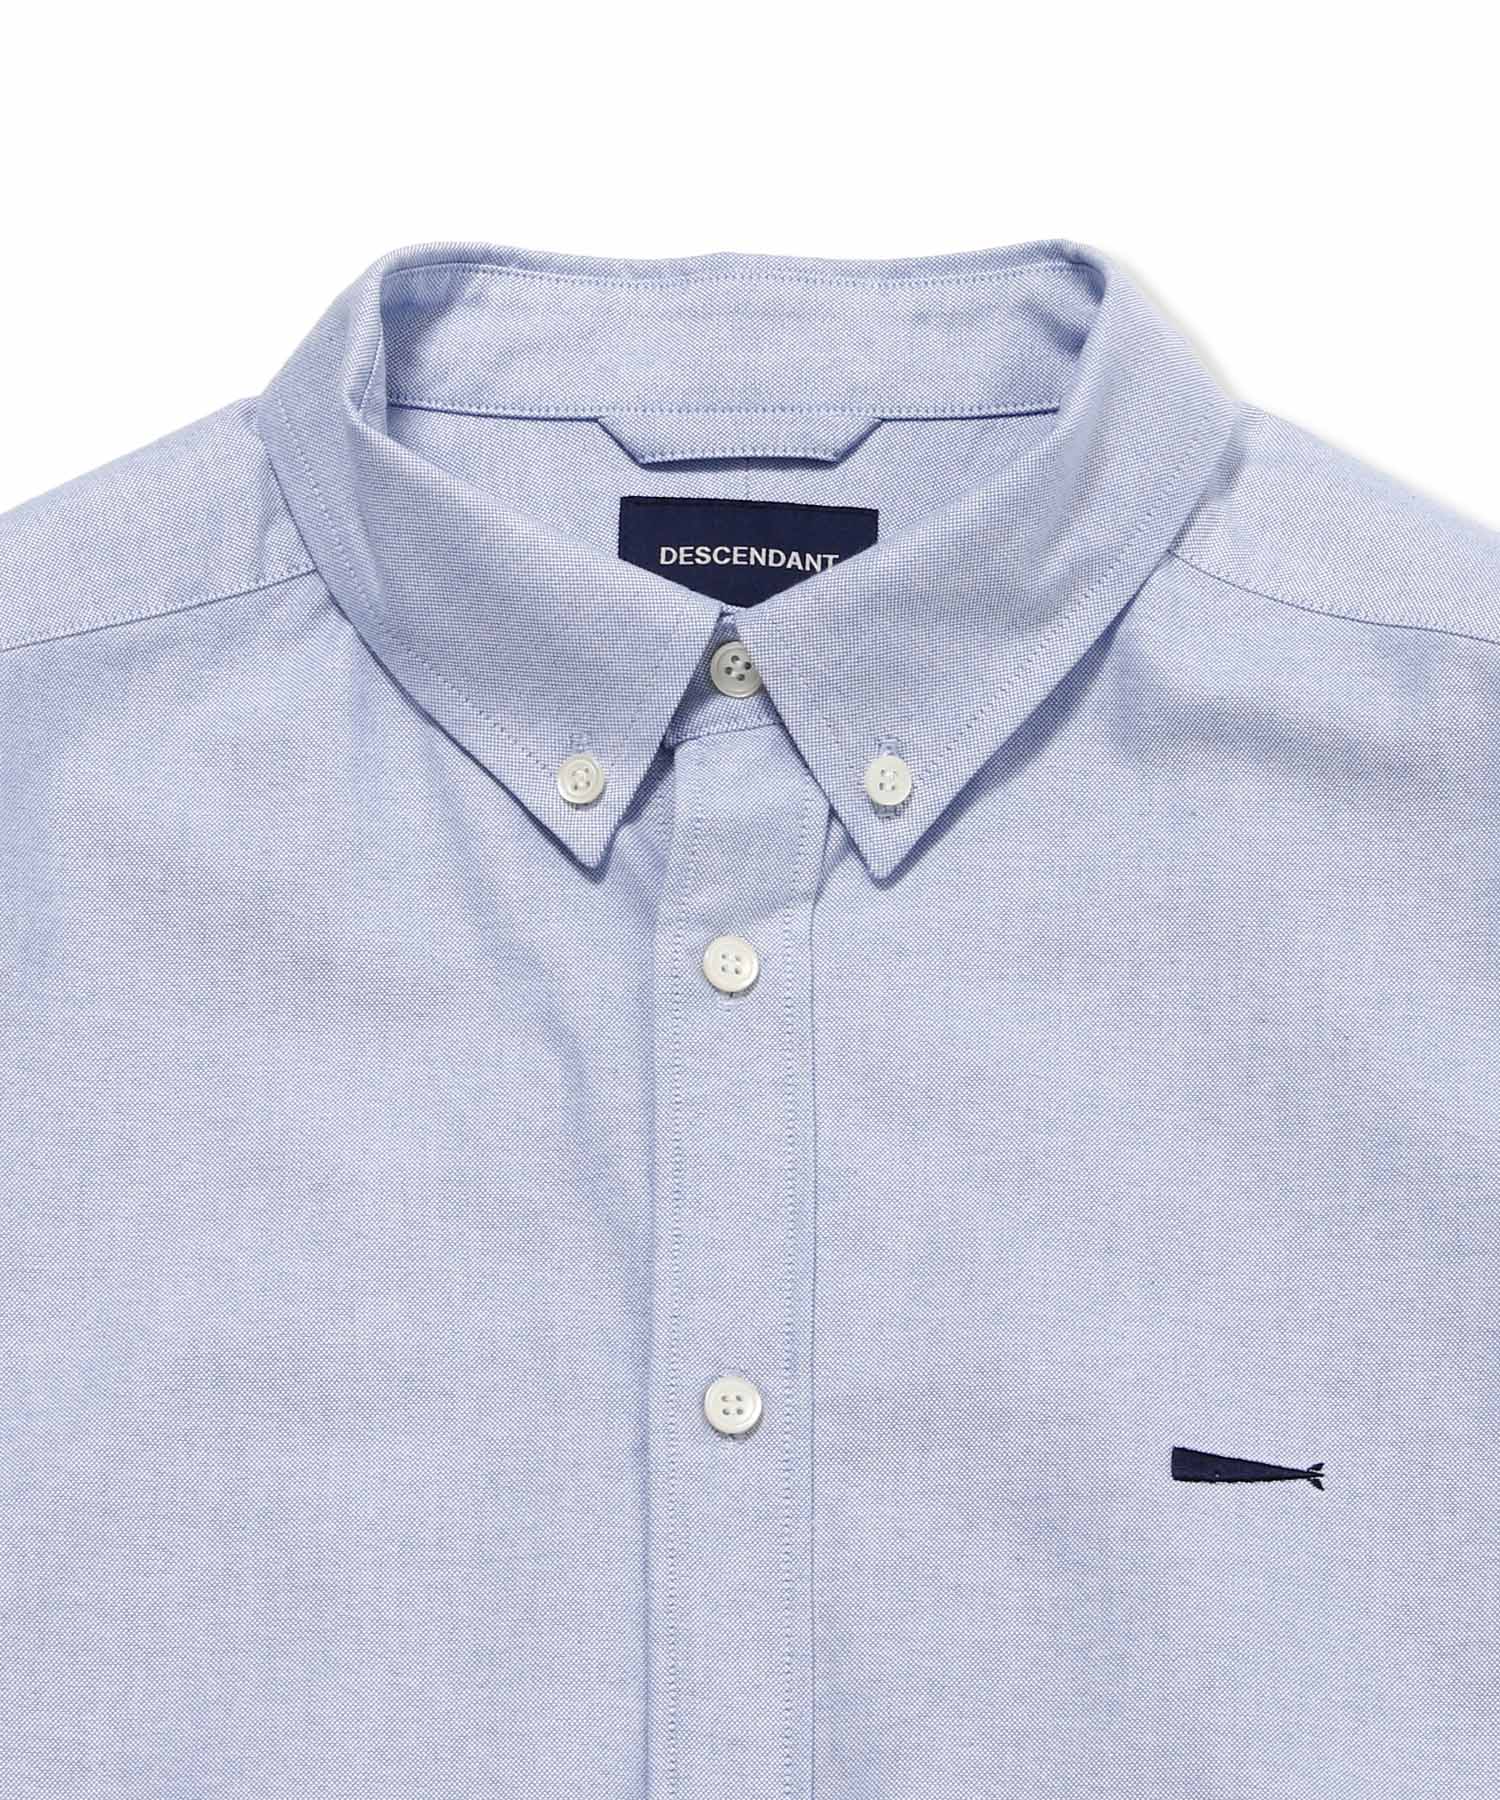 Kennedy's Oxford Ls Shirt - DESCENDANT (ディセンダント) - tops ...